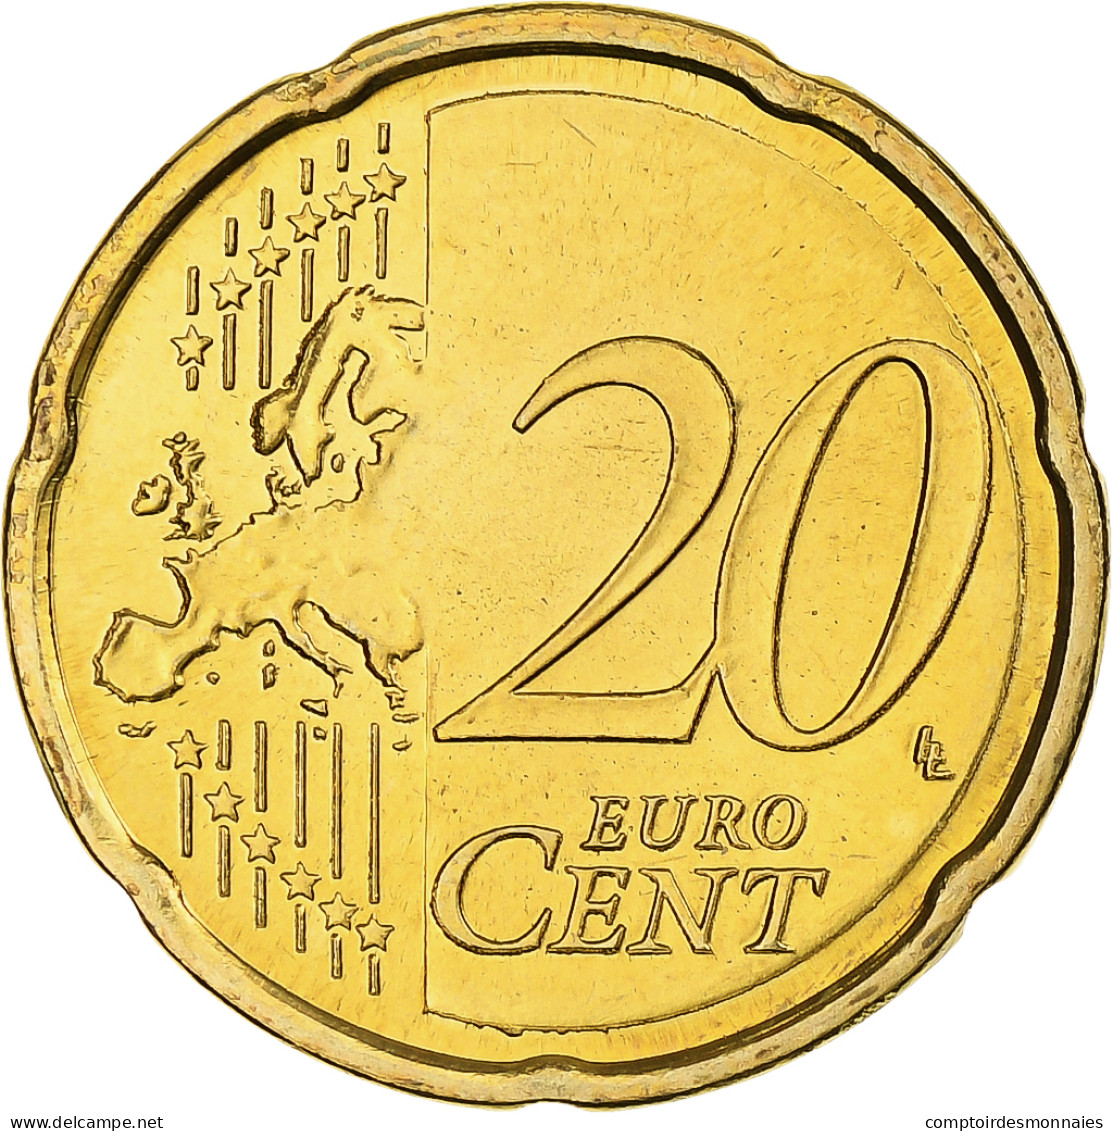 Chypre, 20 Euro Cent, 2008, BU, FDC, Or Nordique, KM:82 - Cyprus